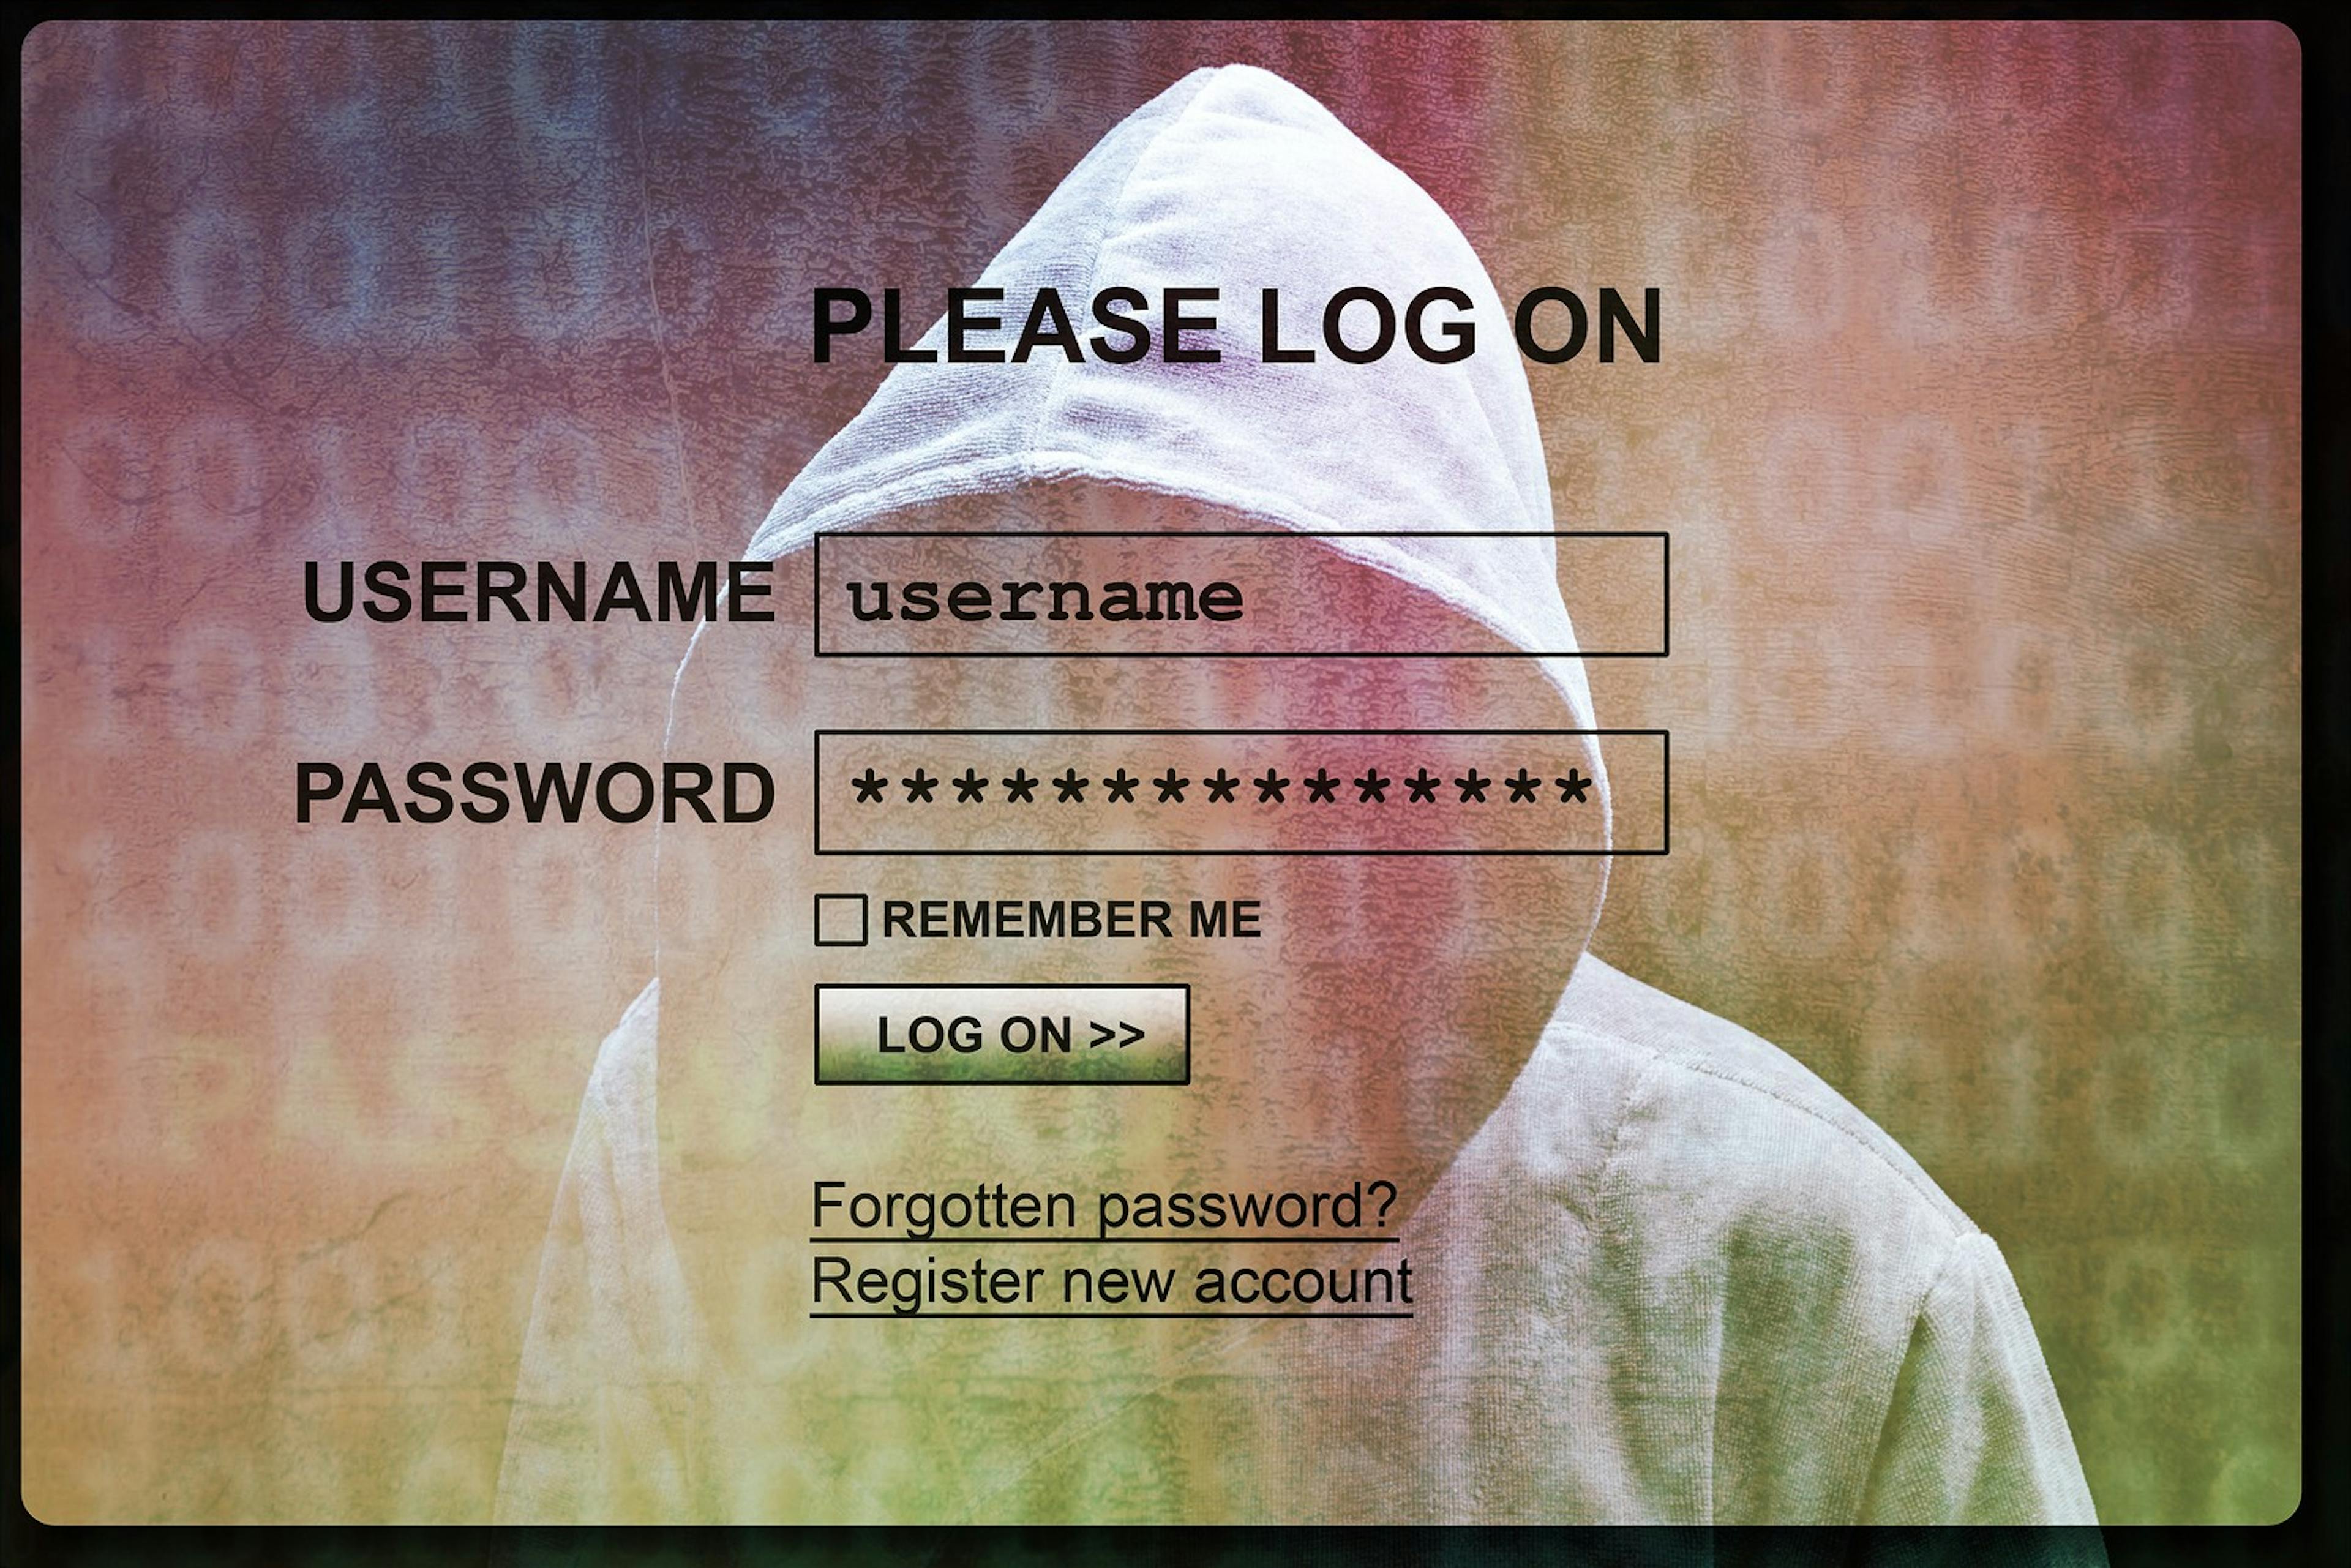 /the-end-of-passwords-is-nigh-a86c65a30465 feature image